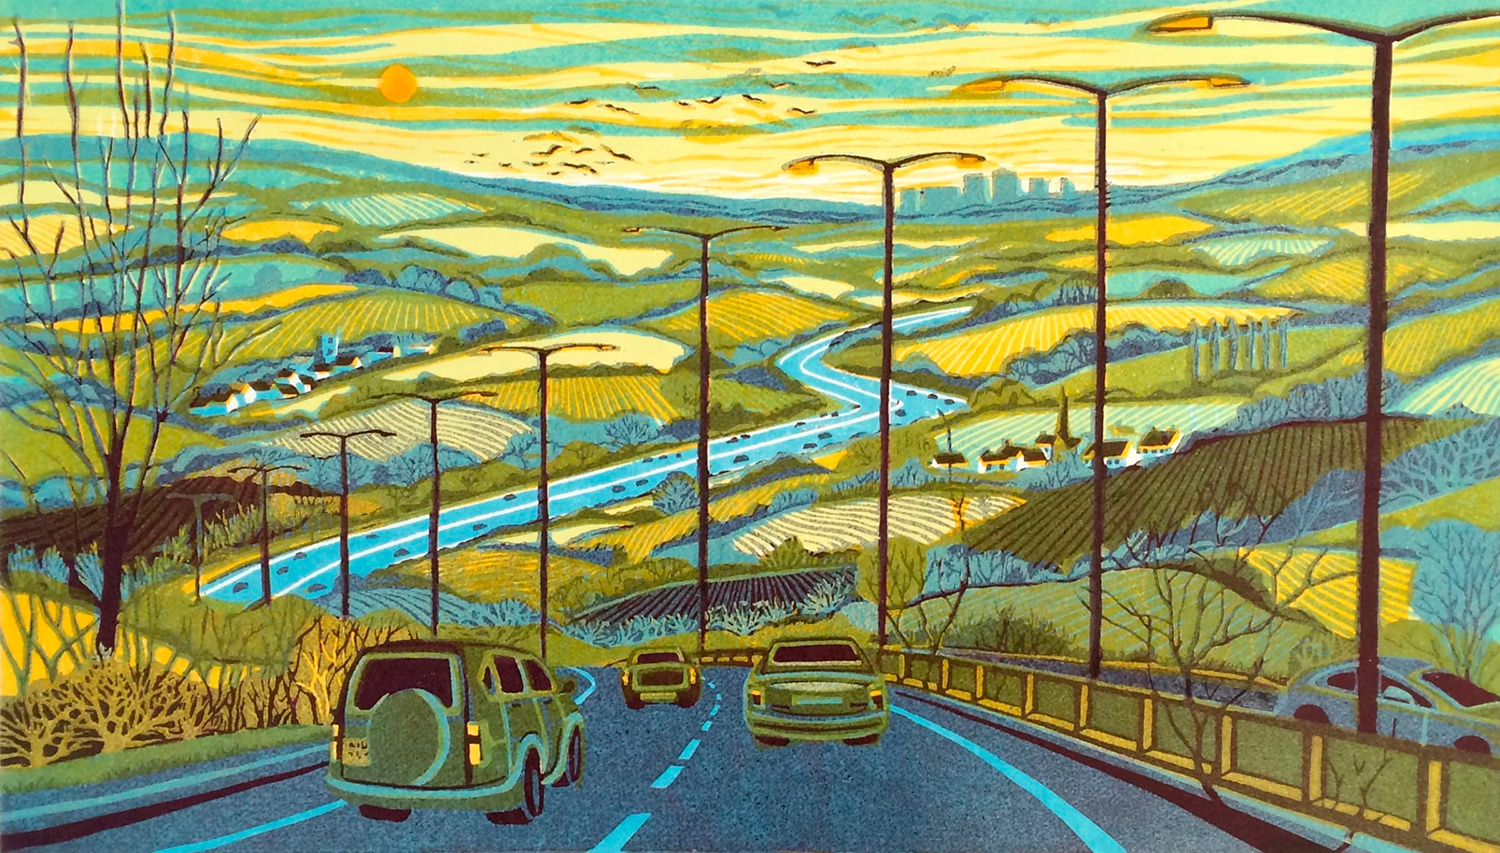 From the Motorway by Gail Brodholt